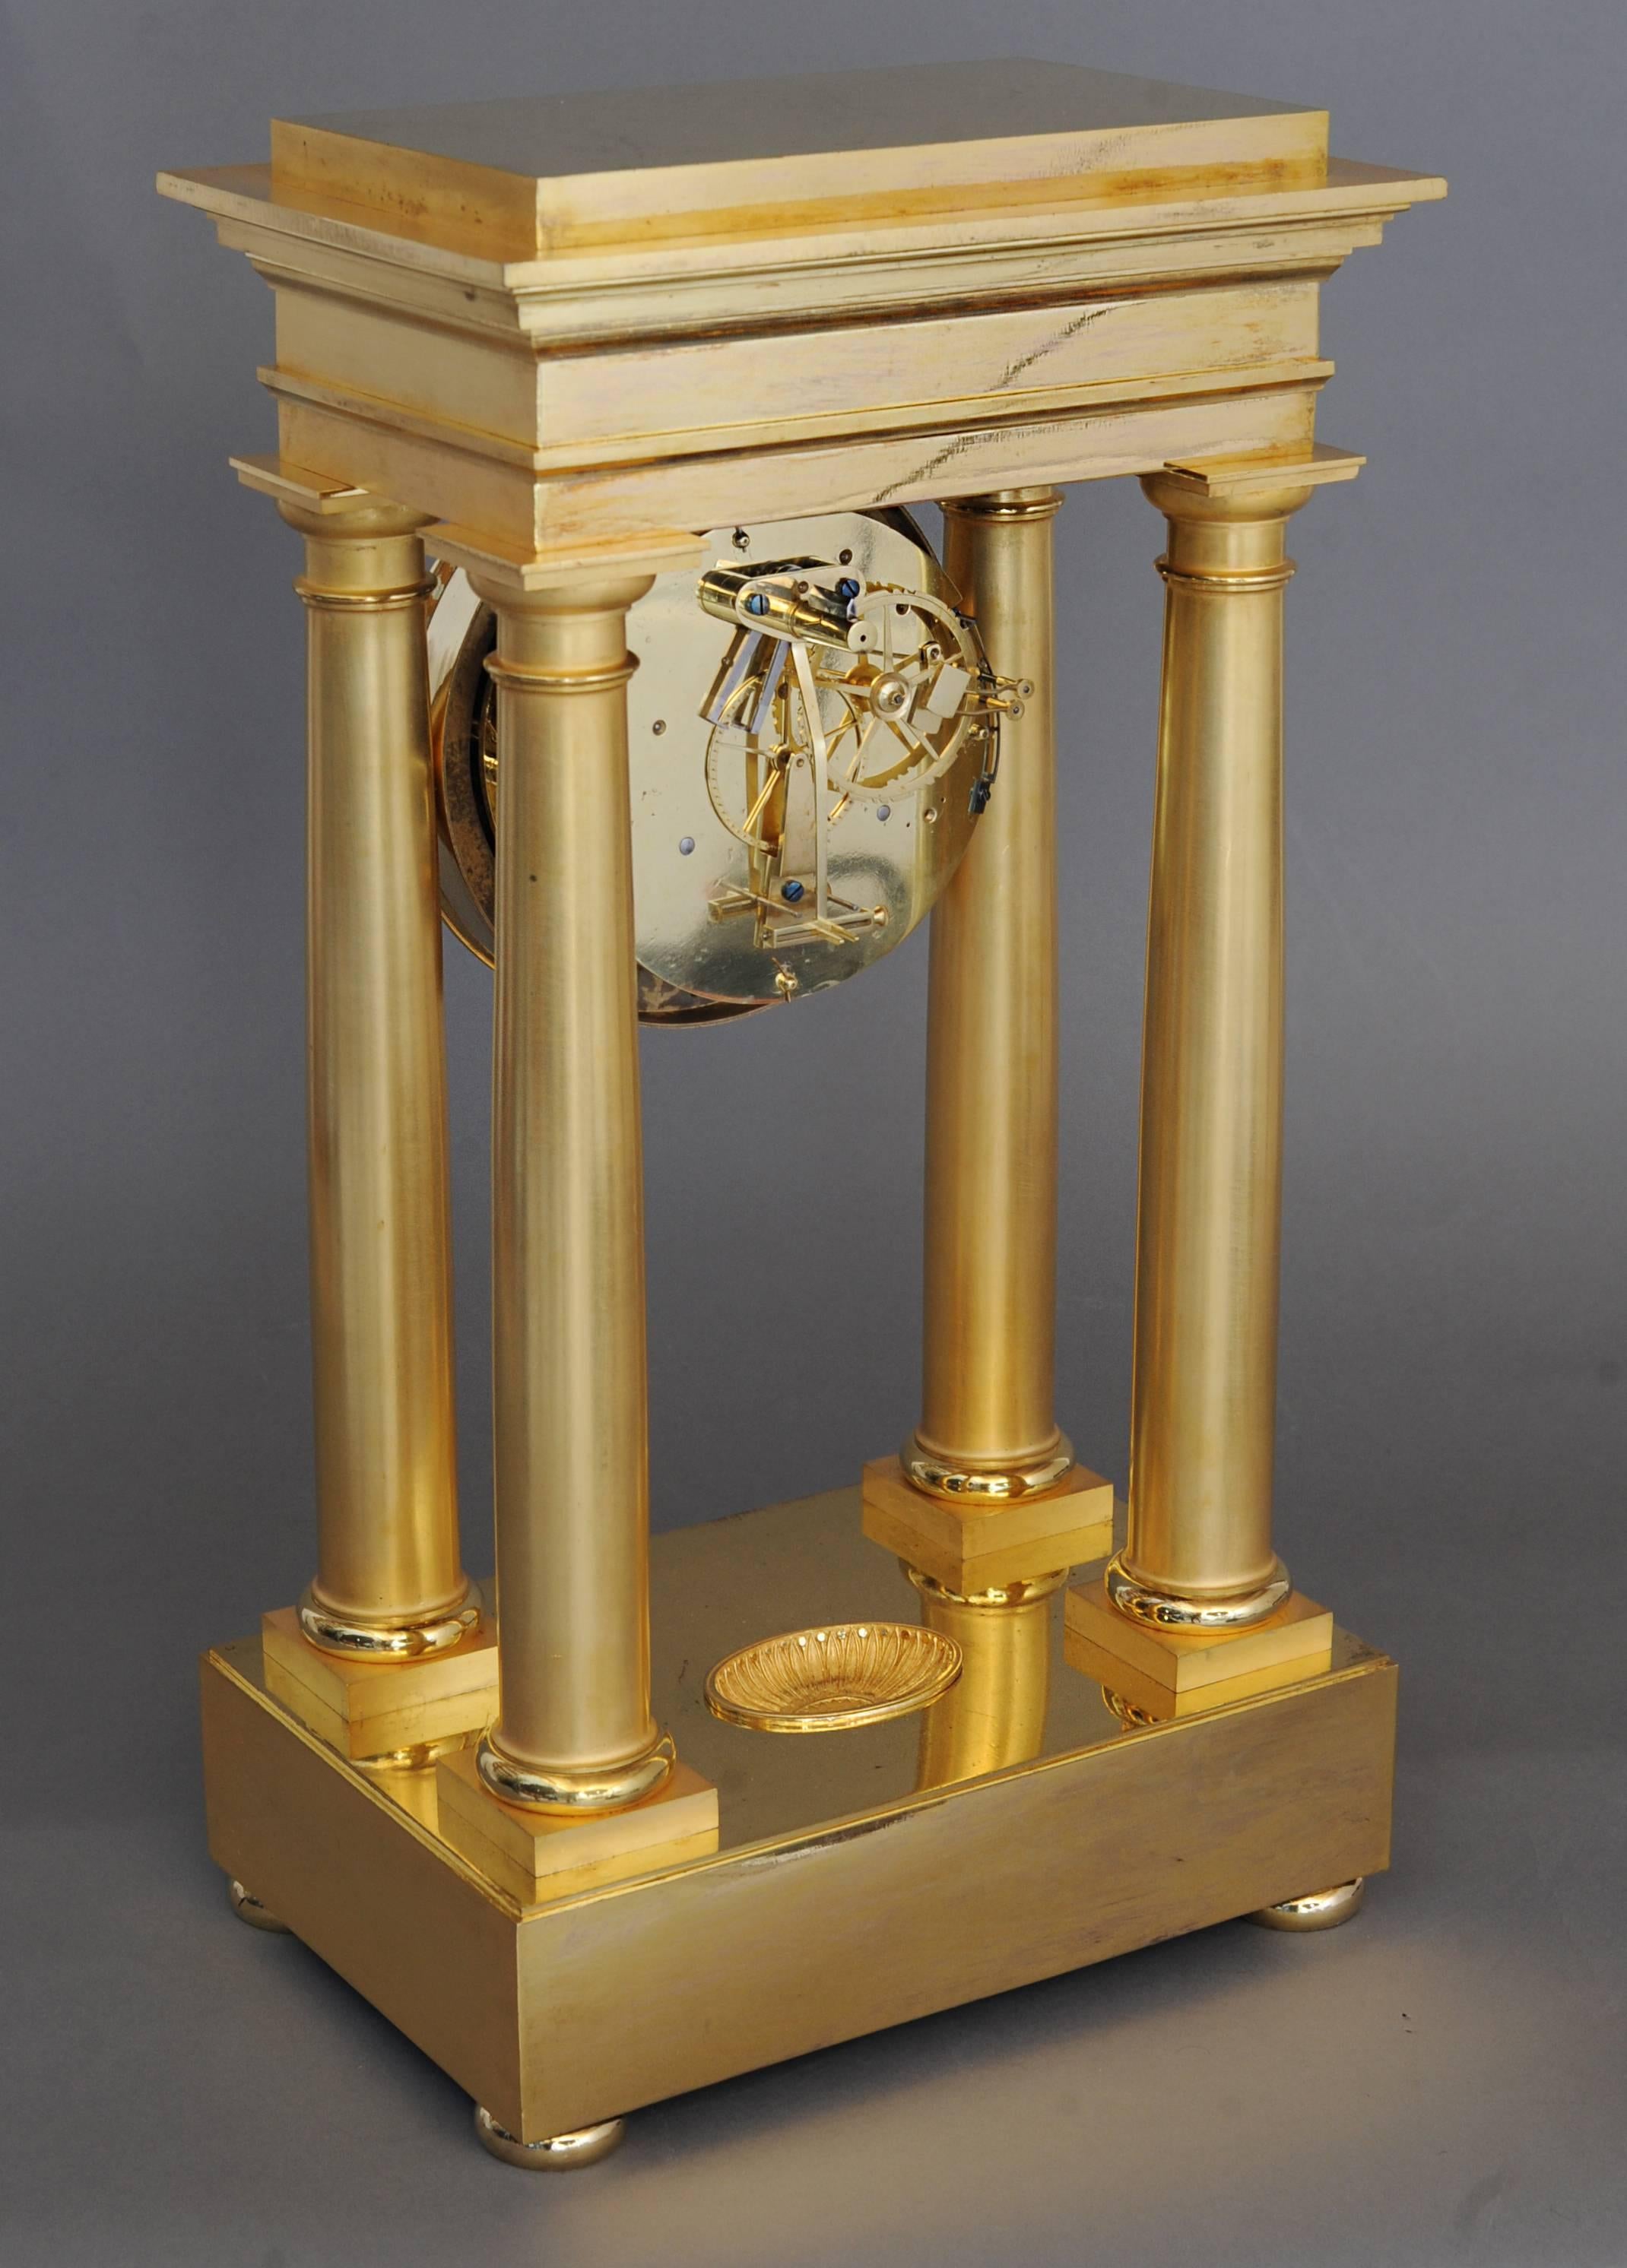 19th Century High Quality Early Empire Four Pillar Mantel Clock by Dieudonné Kinable For Sale